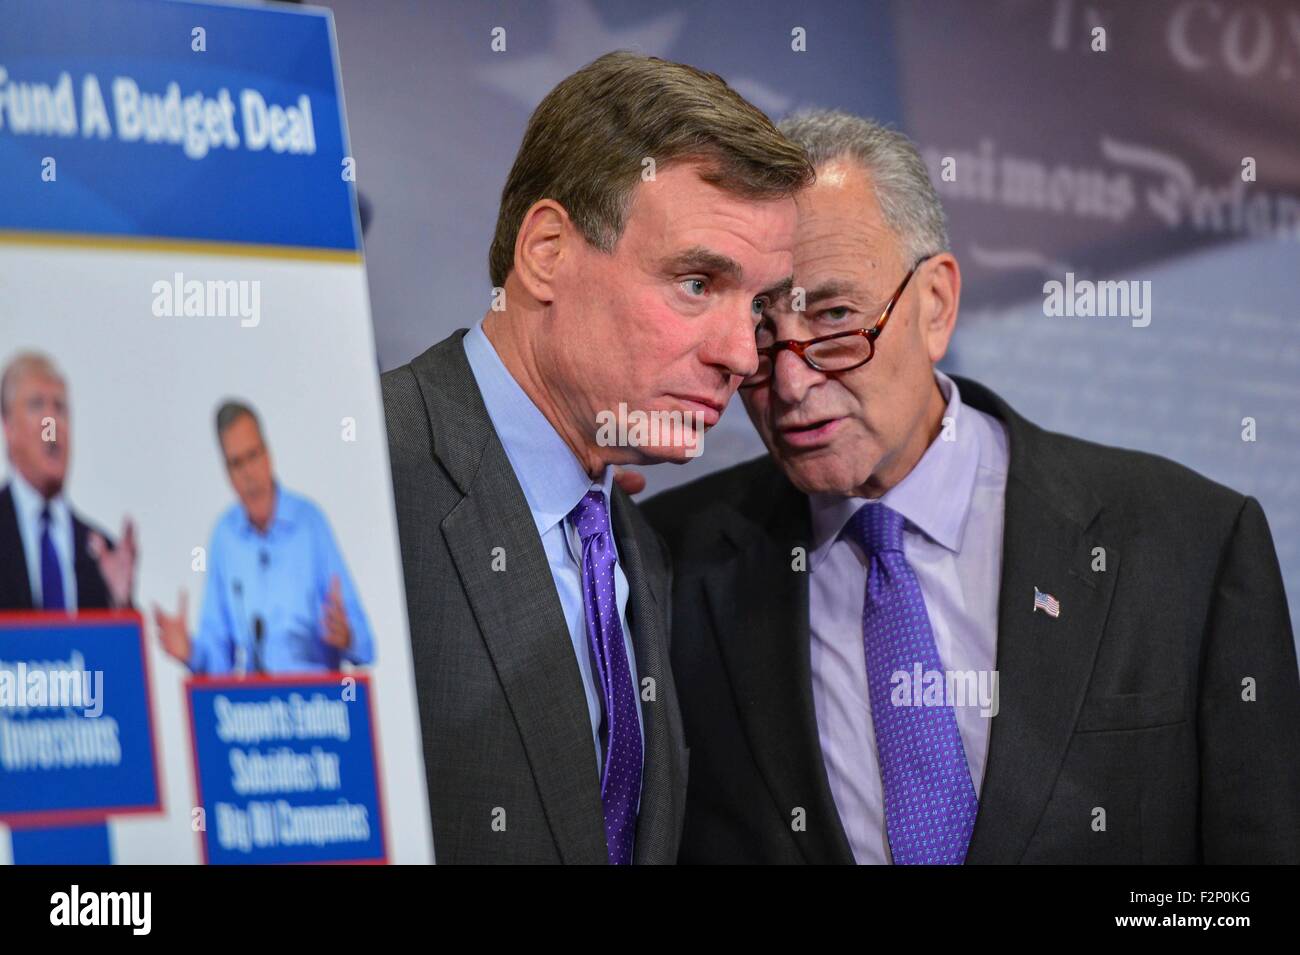 U.S. Senators Chuck Schumer speaks with Senator Mark Warner during a press conference calling for Republicans to support tax loophole closures to help finance a budget agreement on Capitol Hill September 17, 2015 in Washington, DC. Stock Photo